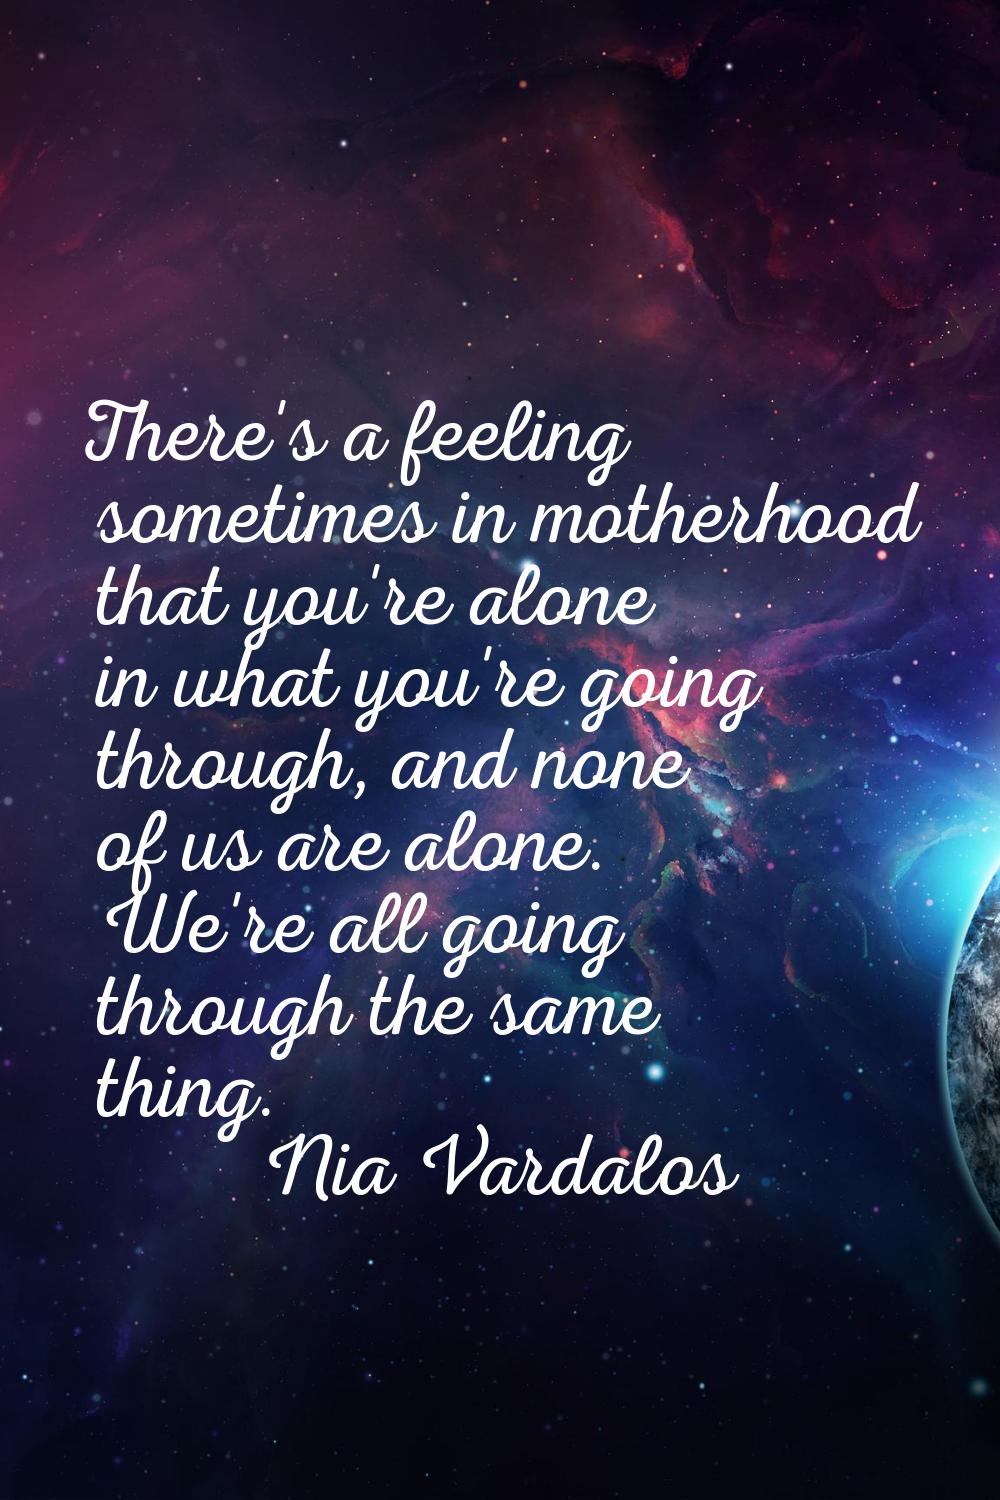 There's a feeling sometimes in motherhood that you're alone in what you're going through, and none 